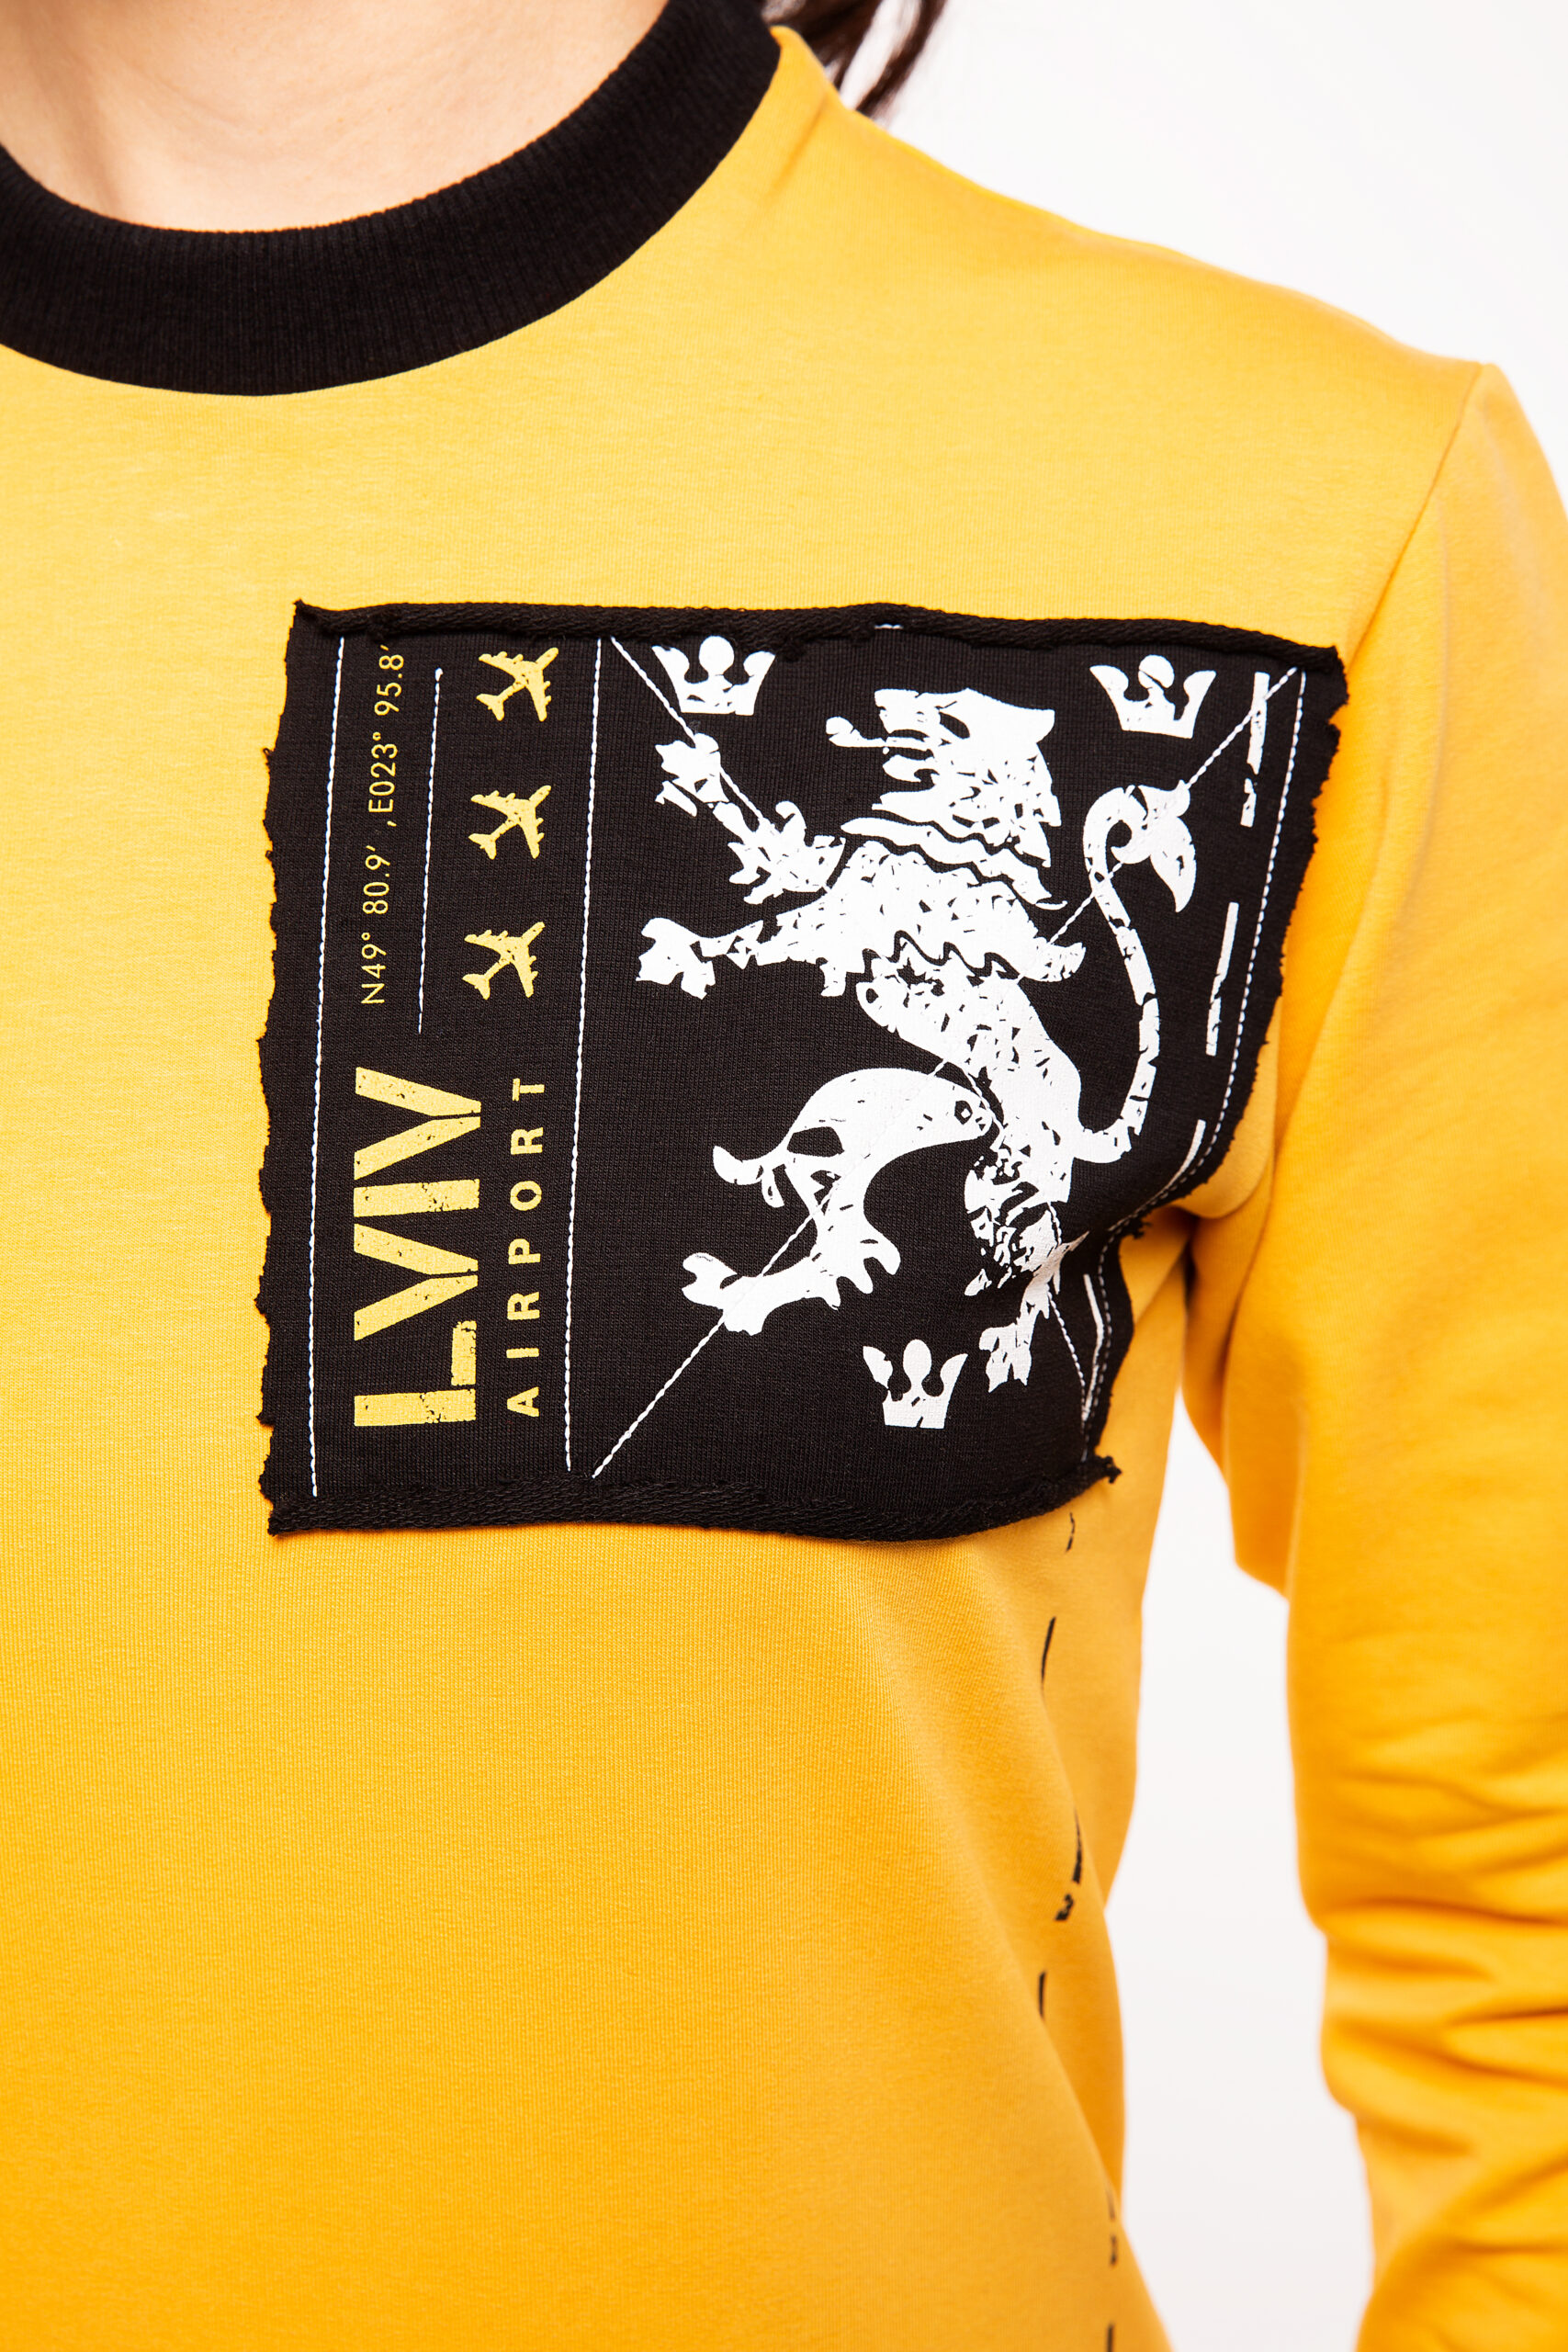 Women's Long Sleeve Have A Nice Fligh. Color yellow. 
Size worn by the model: XS.